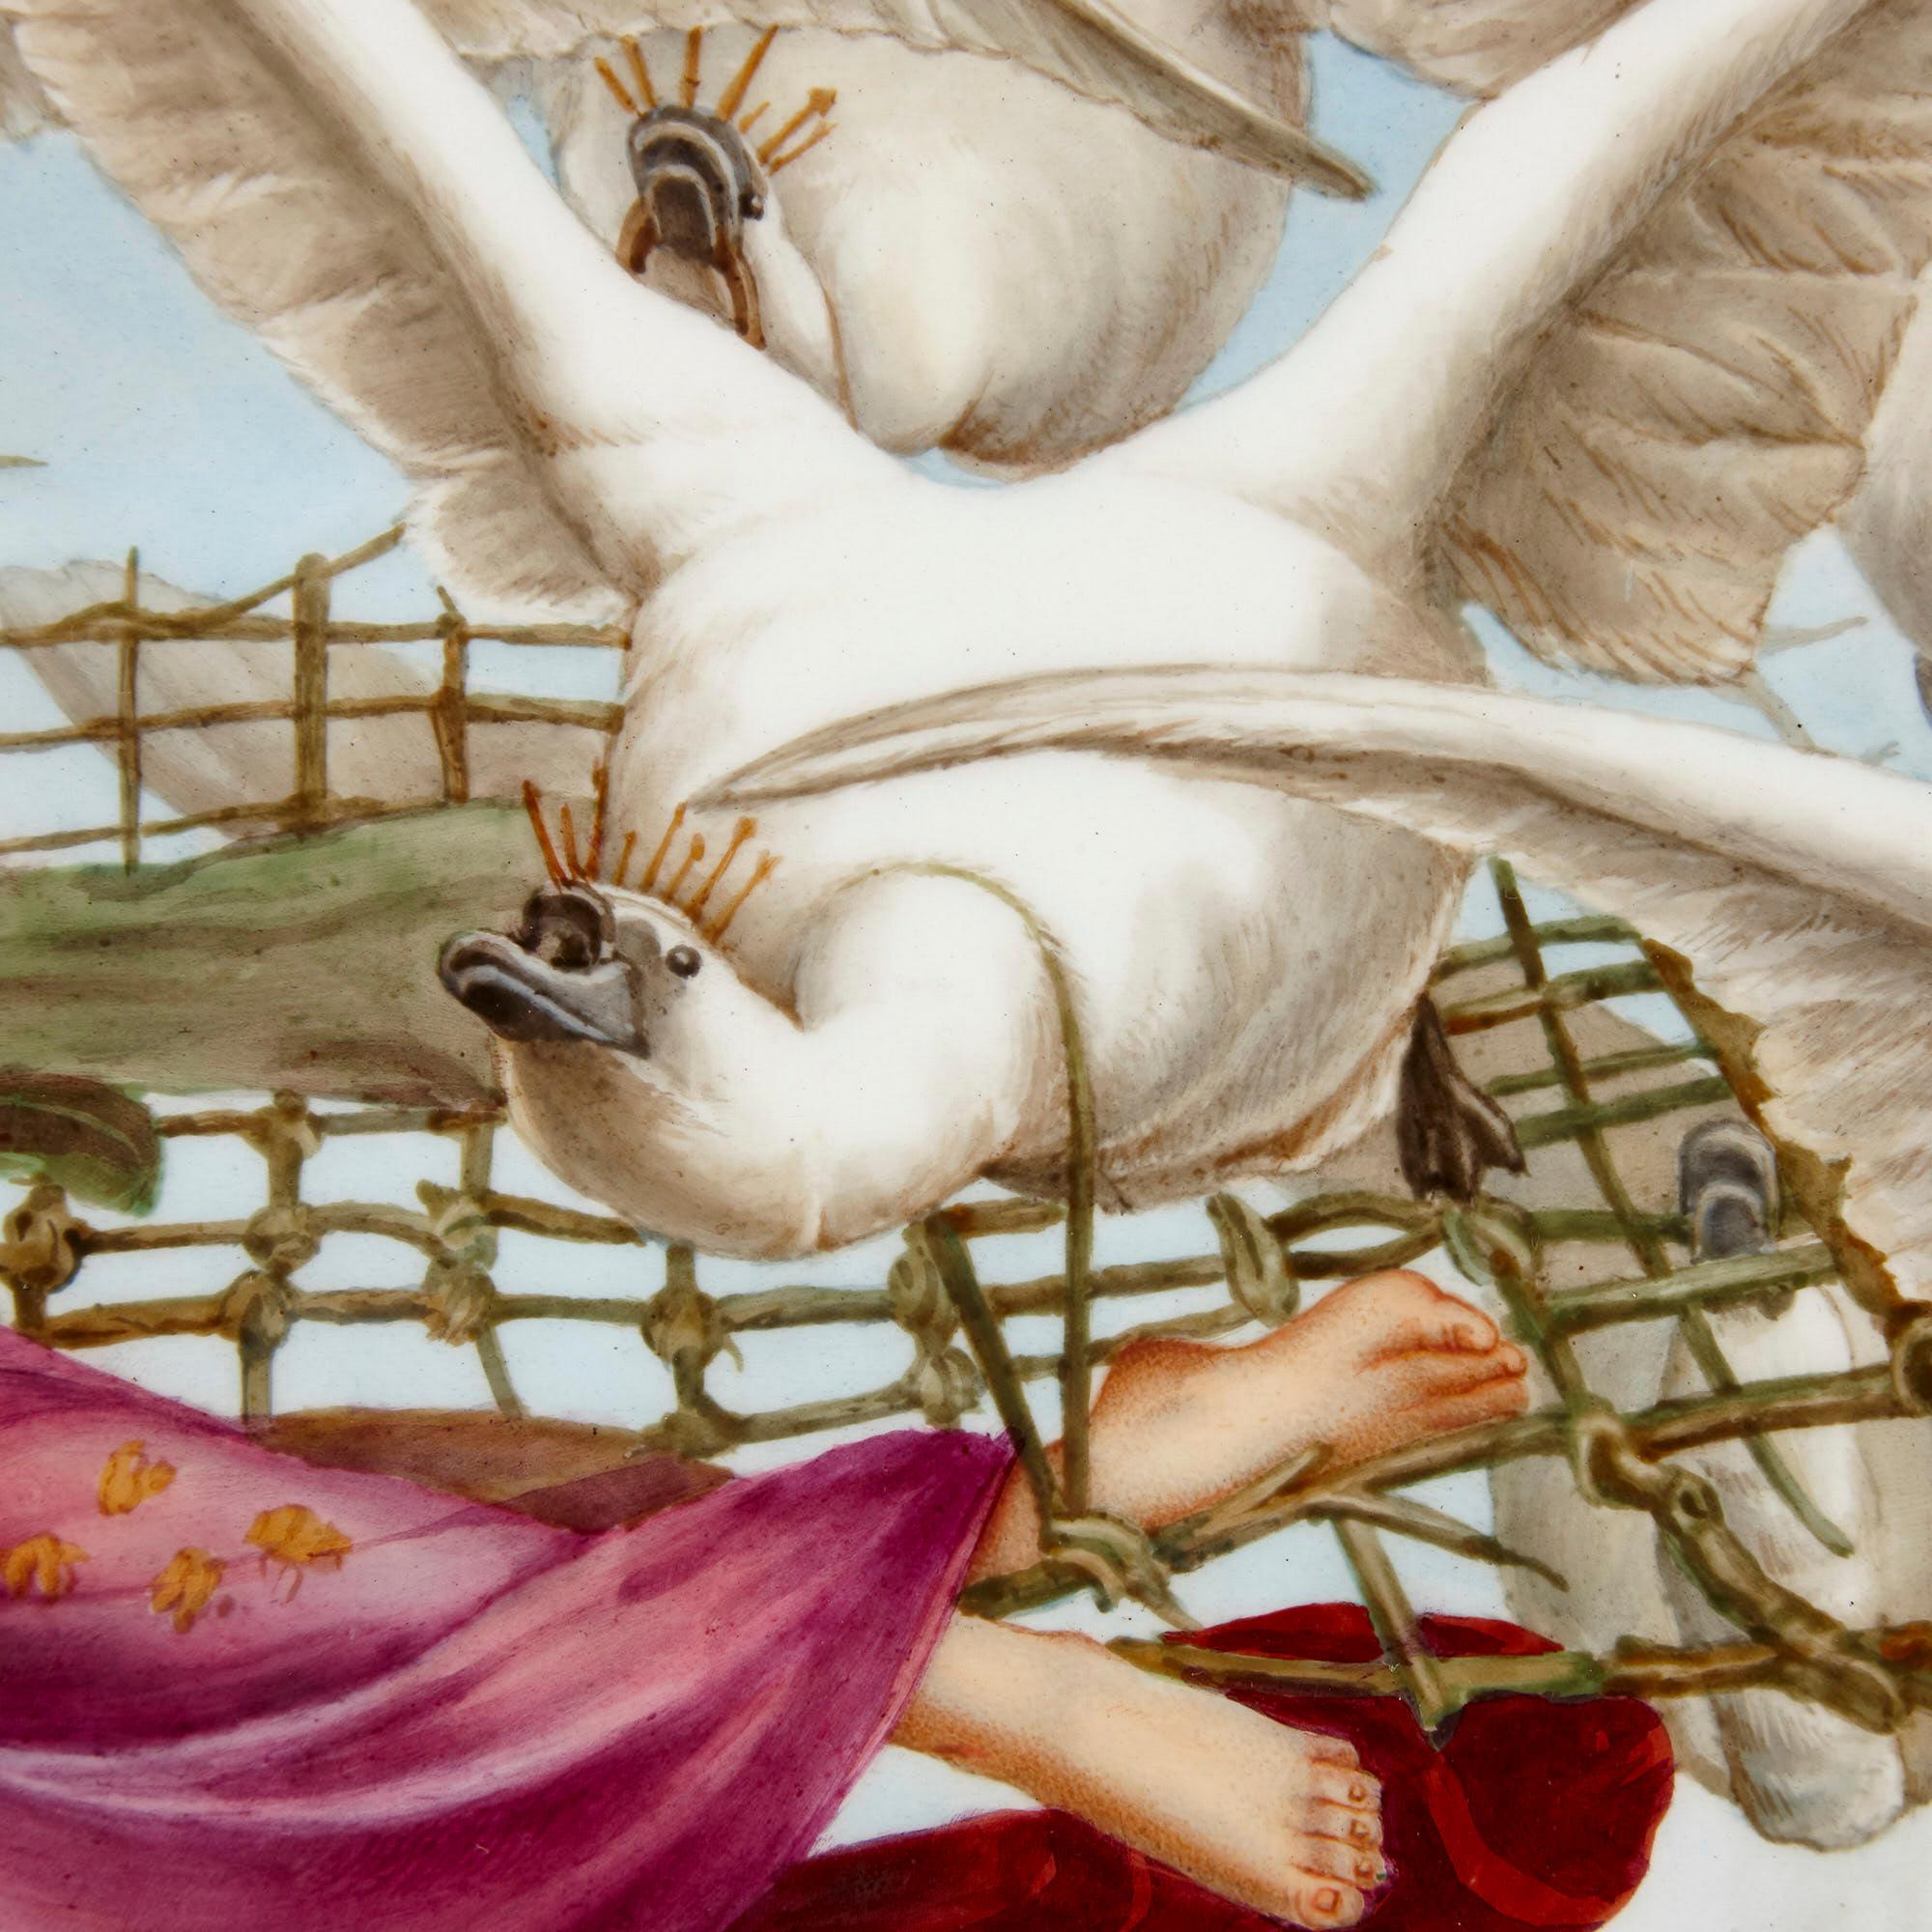 Painted Porcelain Plaque of Woman Flown Aloft by Swans In Good Condition For Sale In London, GB